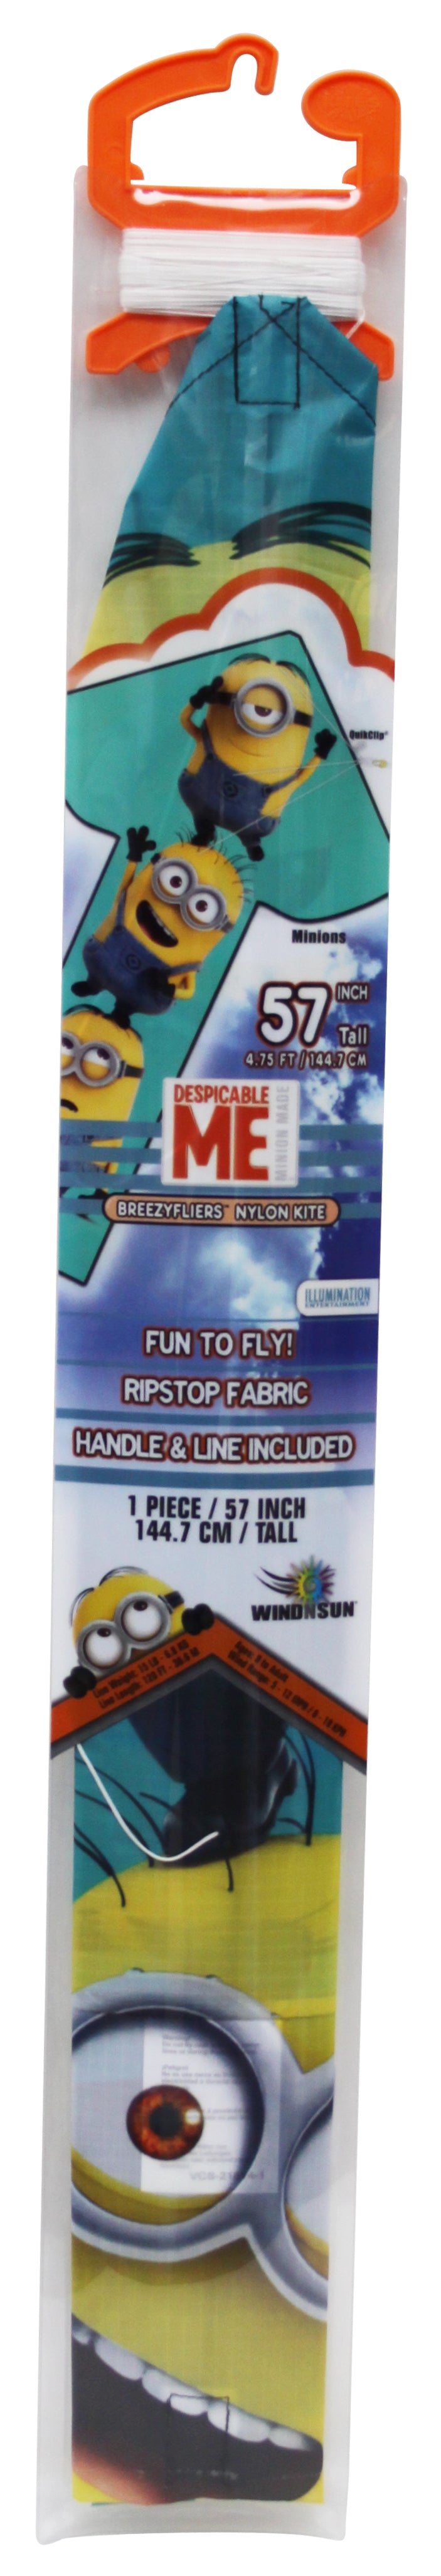 WindNSun BreezyFlier 57 Despicable Me Minion Made Kite in packaging